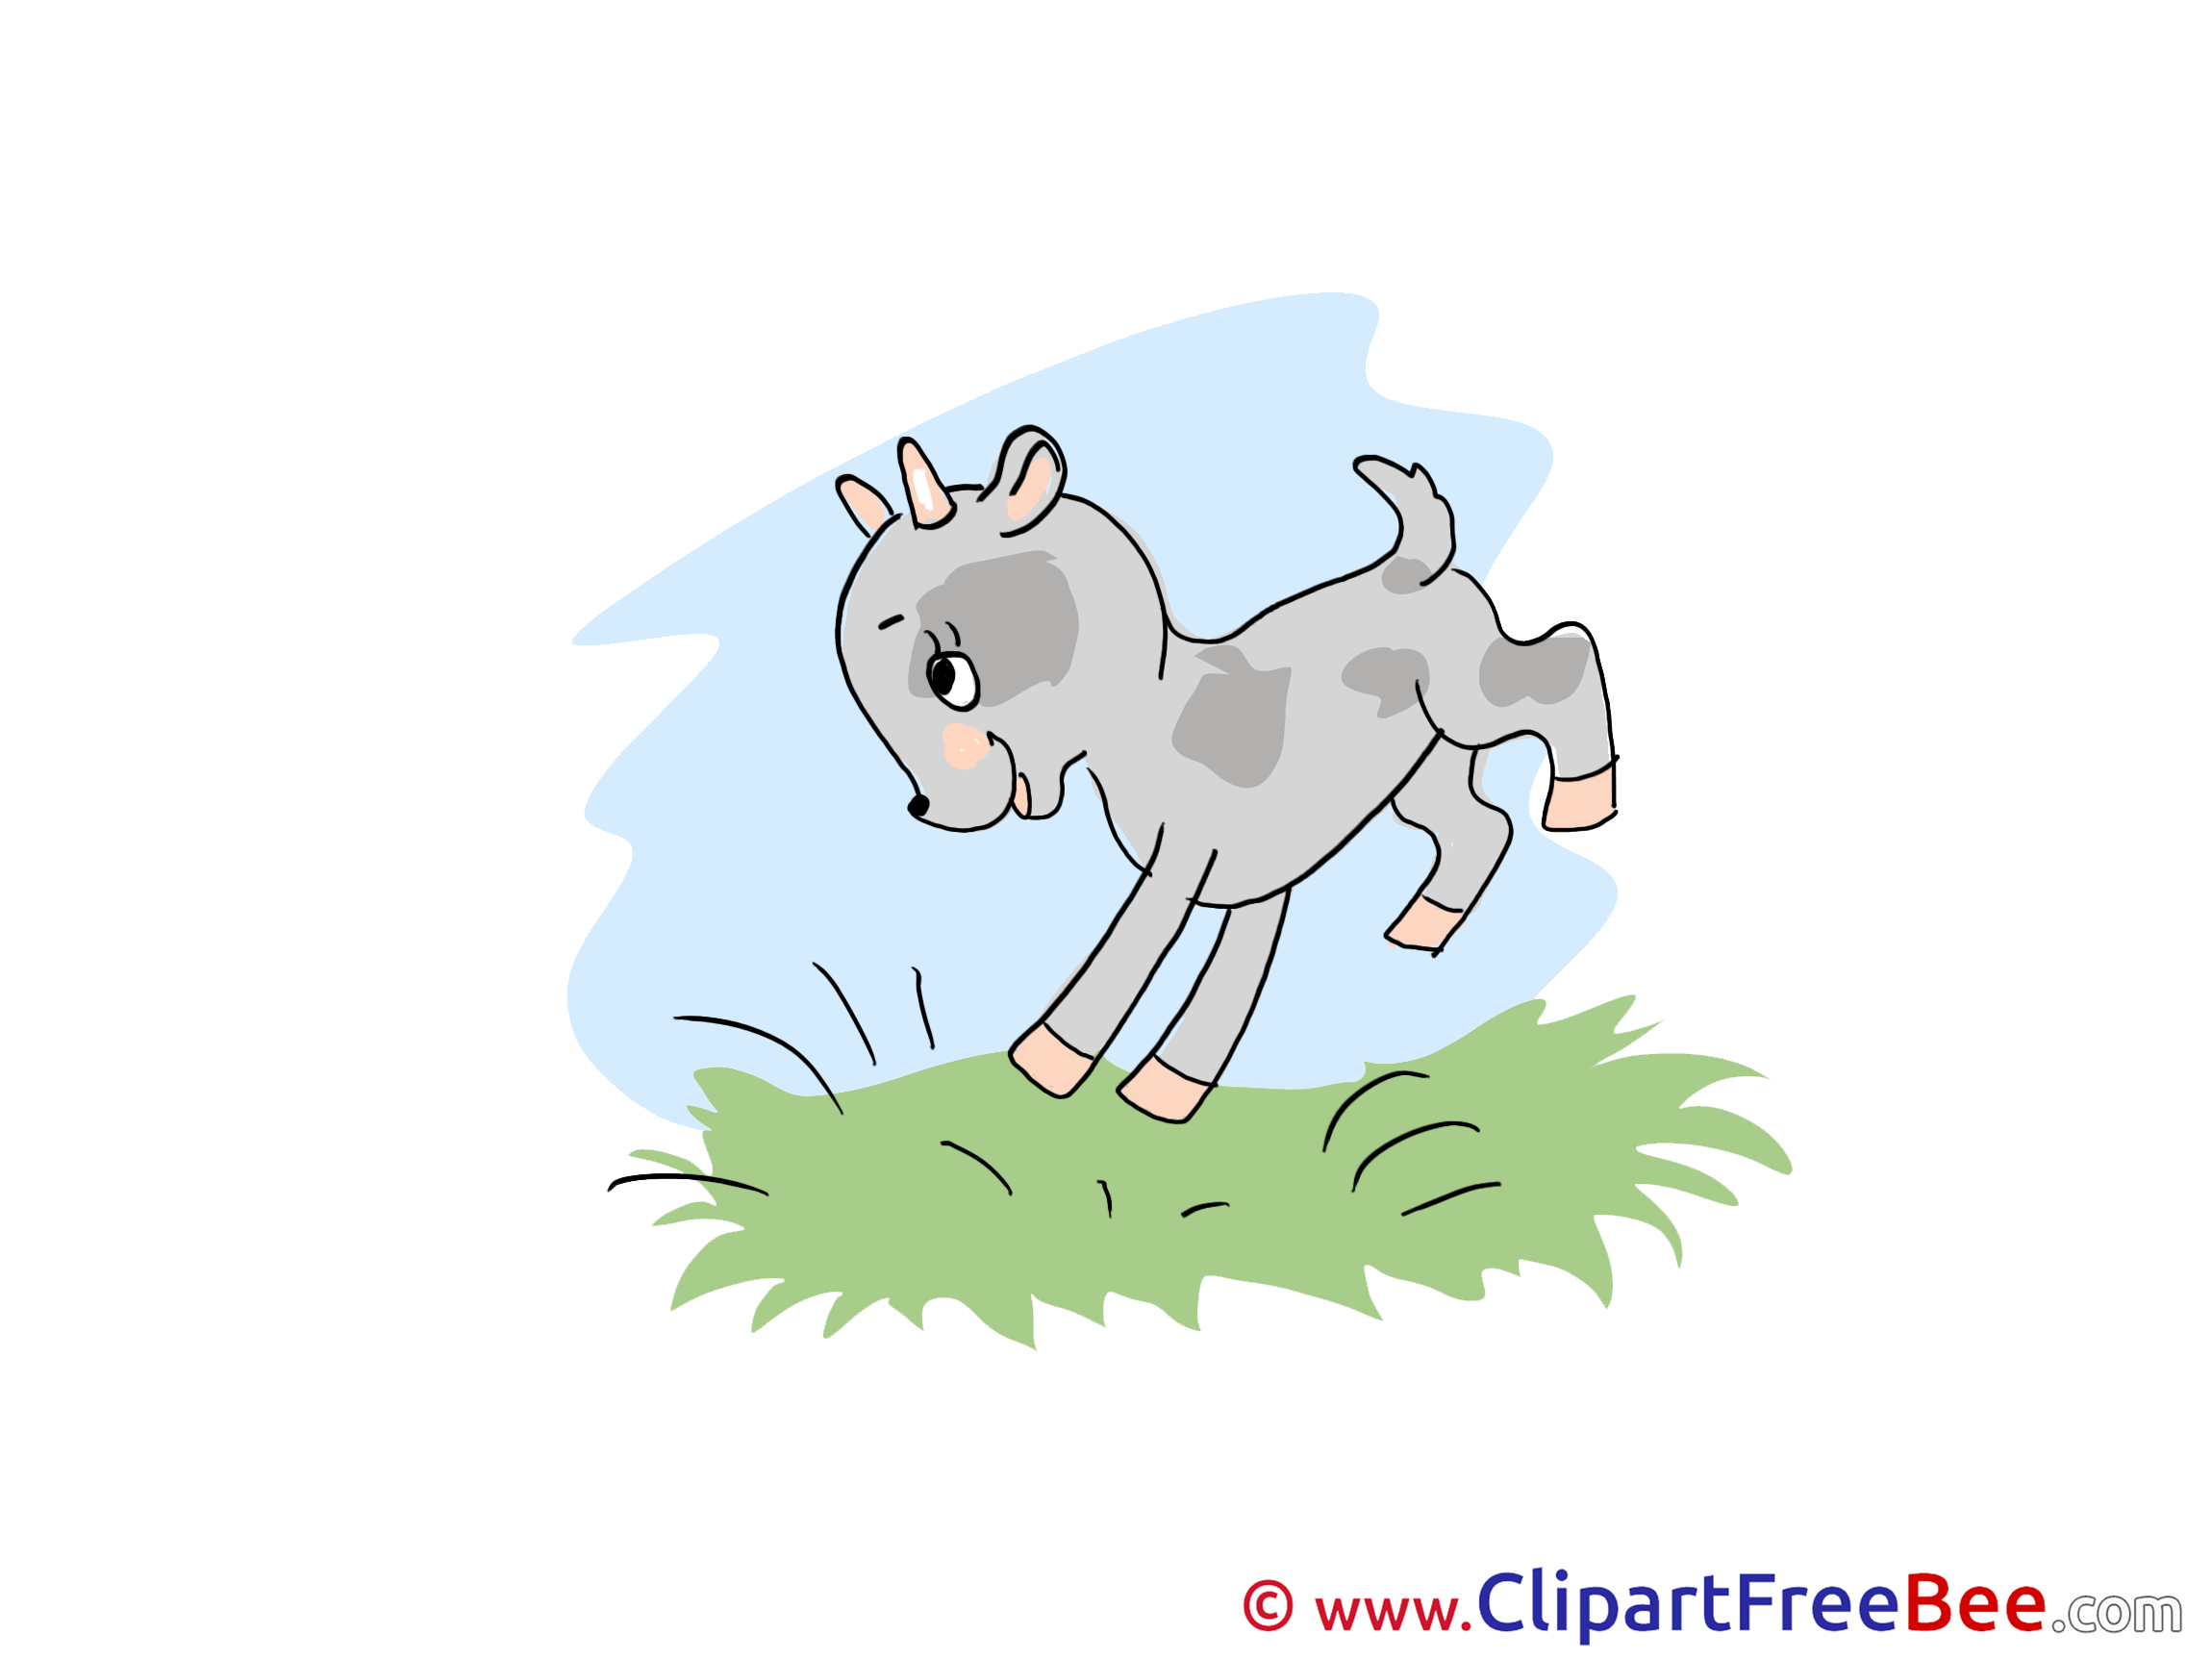 Sky Grass Goatling Clipart free Image download